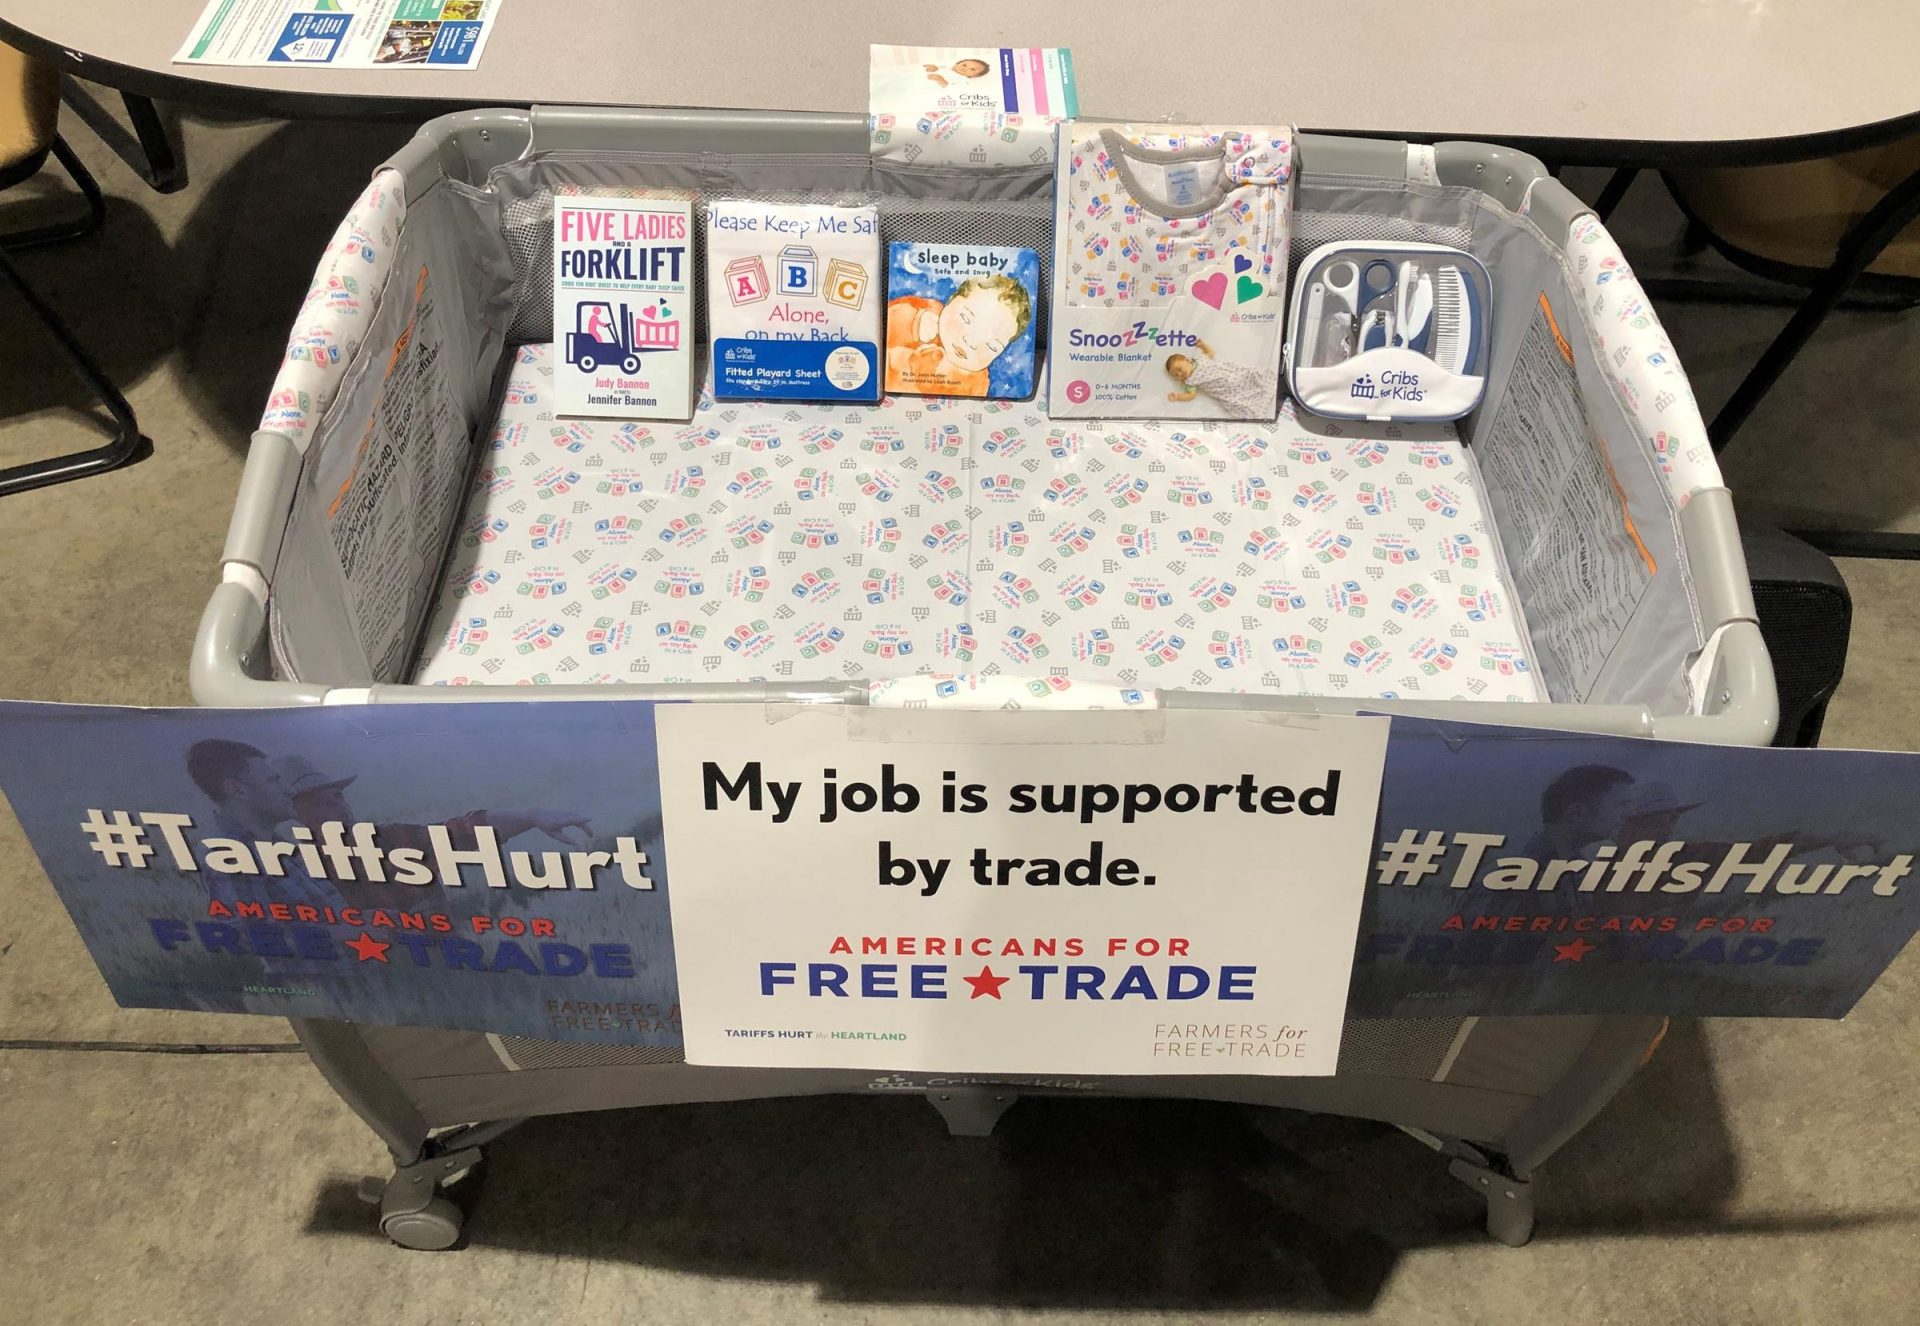 A Cribette distributed by the Pittsburgh nonprofit Cribs For Kids contains infant items, many of which were imported from China. The company says the recent trade tariffs have forced them to increase the cost of their products.